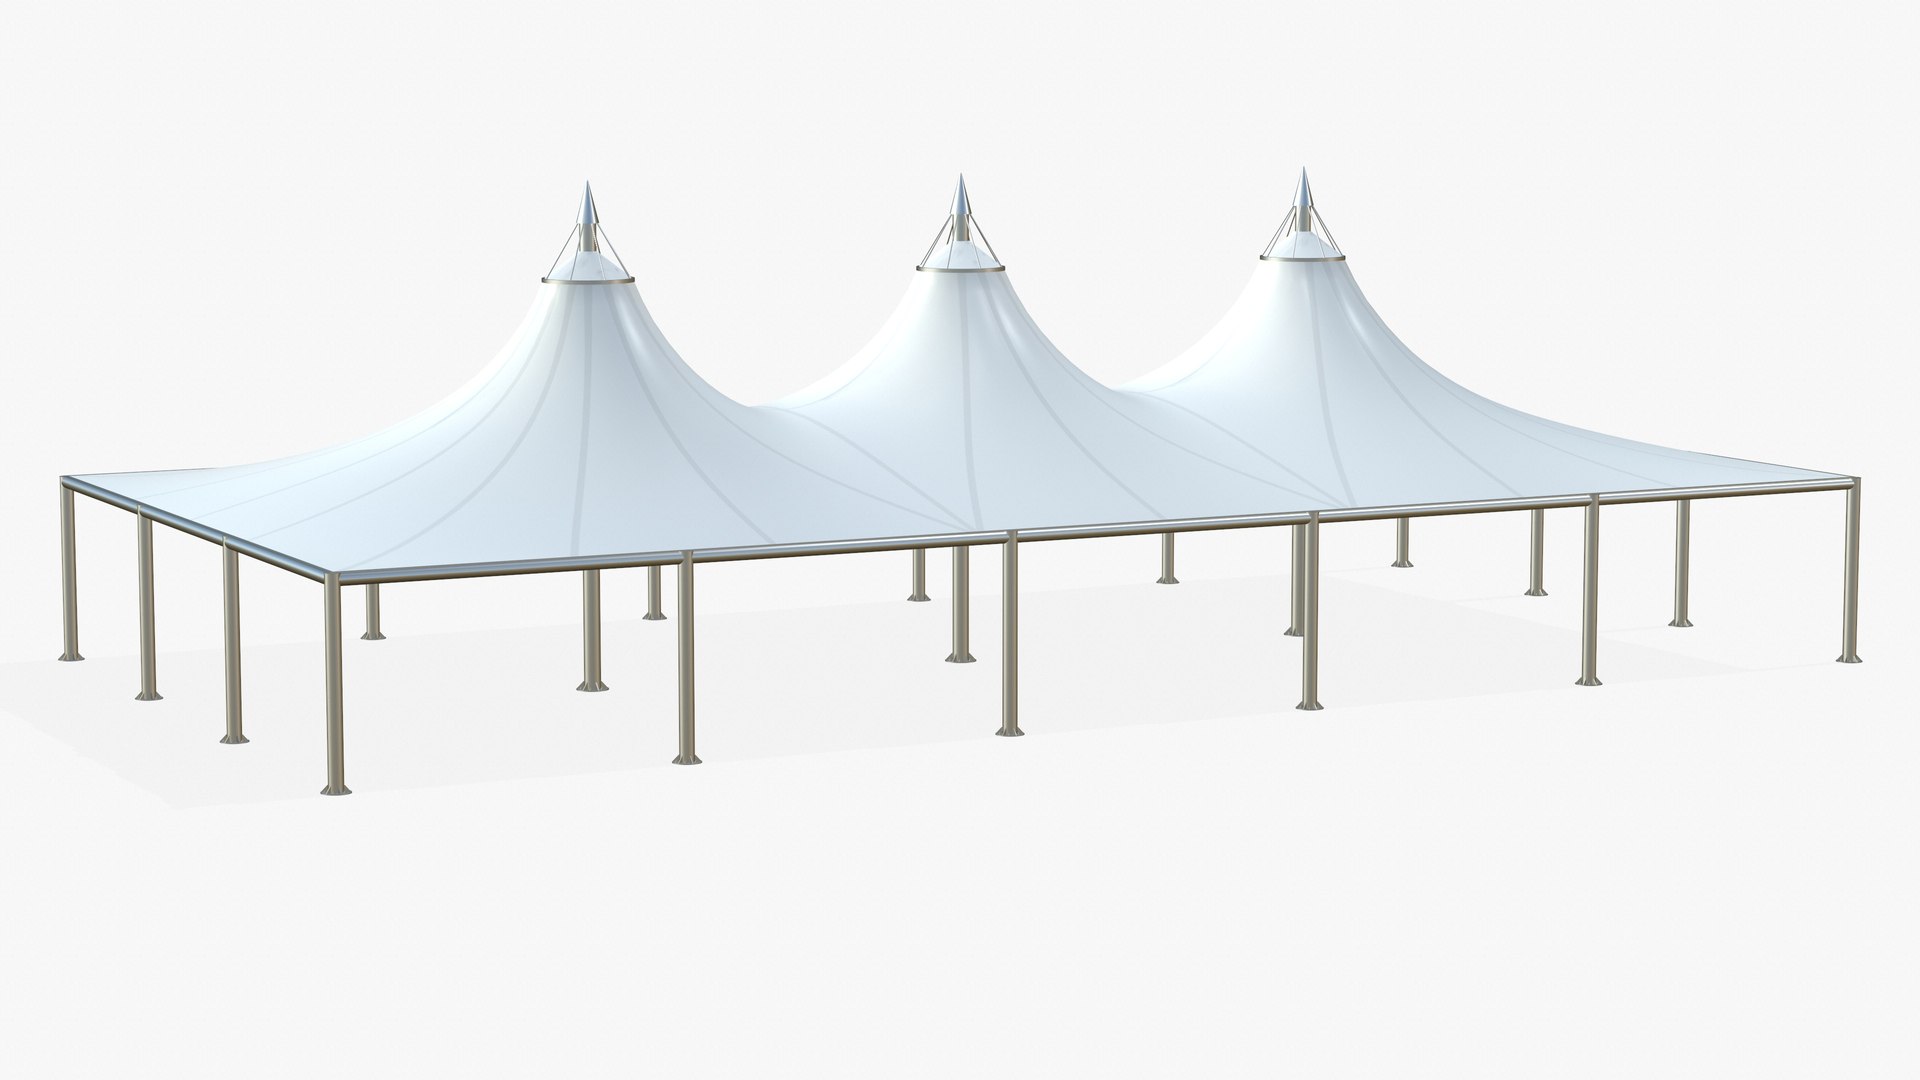 Tensile Structures Conical model https://p.turbosquid.com/ts-thumb/DL/BFfso2/OD/13/jpg/1641201477/1920x1080/fit_q87/2c350059660674a9c310653a14dcb517c5cc5429/13.jpg